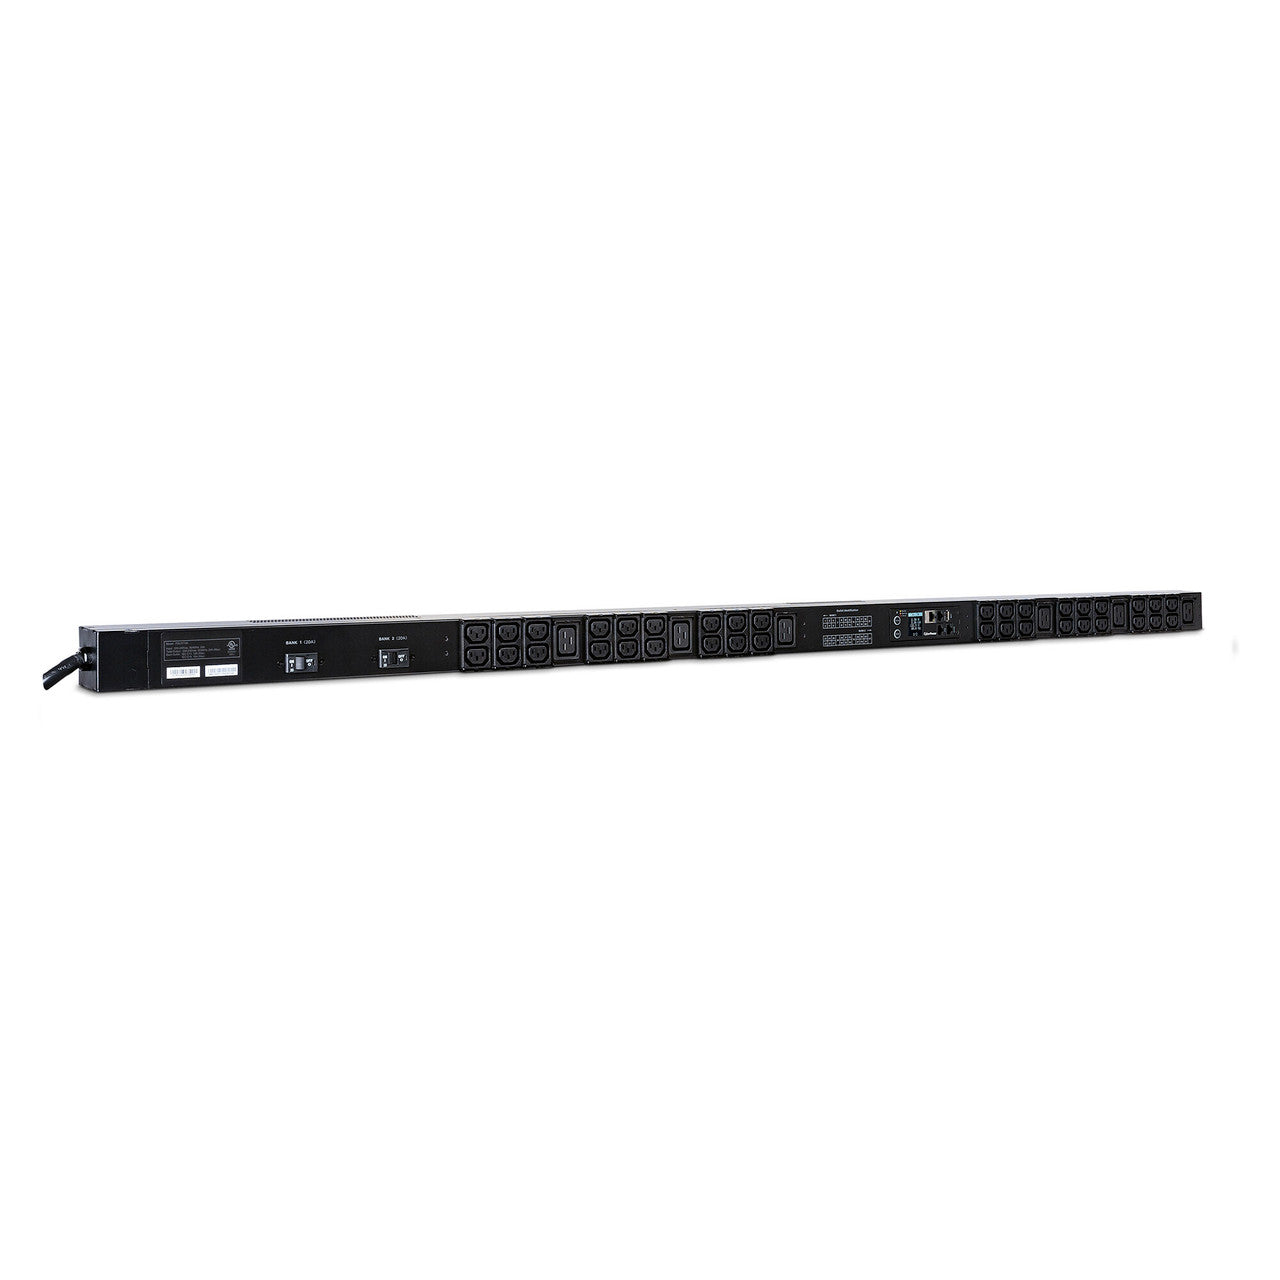 CyberPower PDU31106 MONITORED PDU, 30A (DERATED TO 24A), 200-240V, 50/60 HZ, 36 x IEC-320 C13 OUTLETS + 6 x IEC-320 C19 OUTLETS